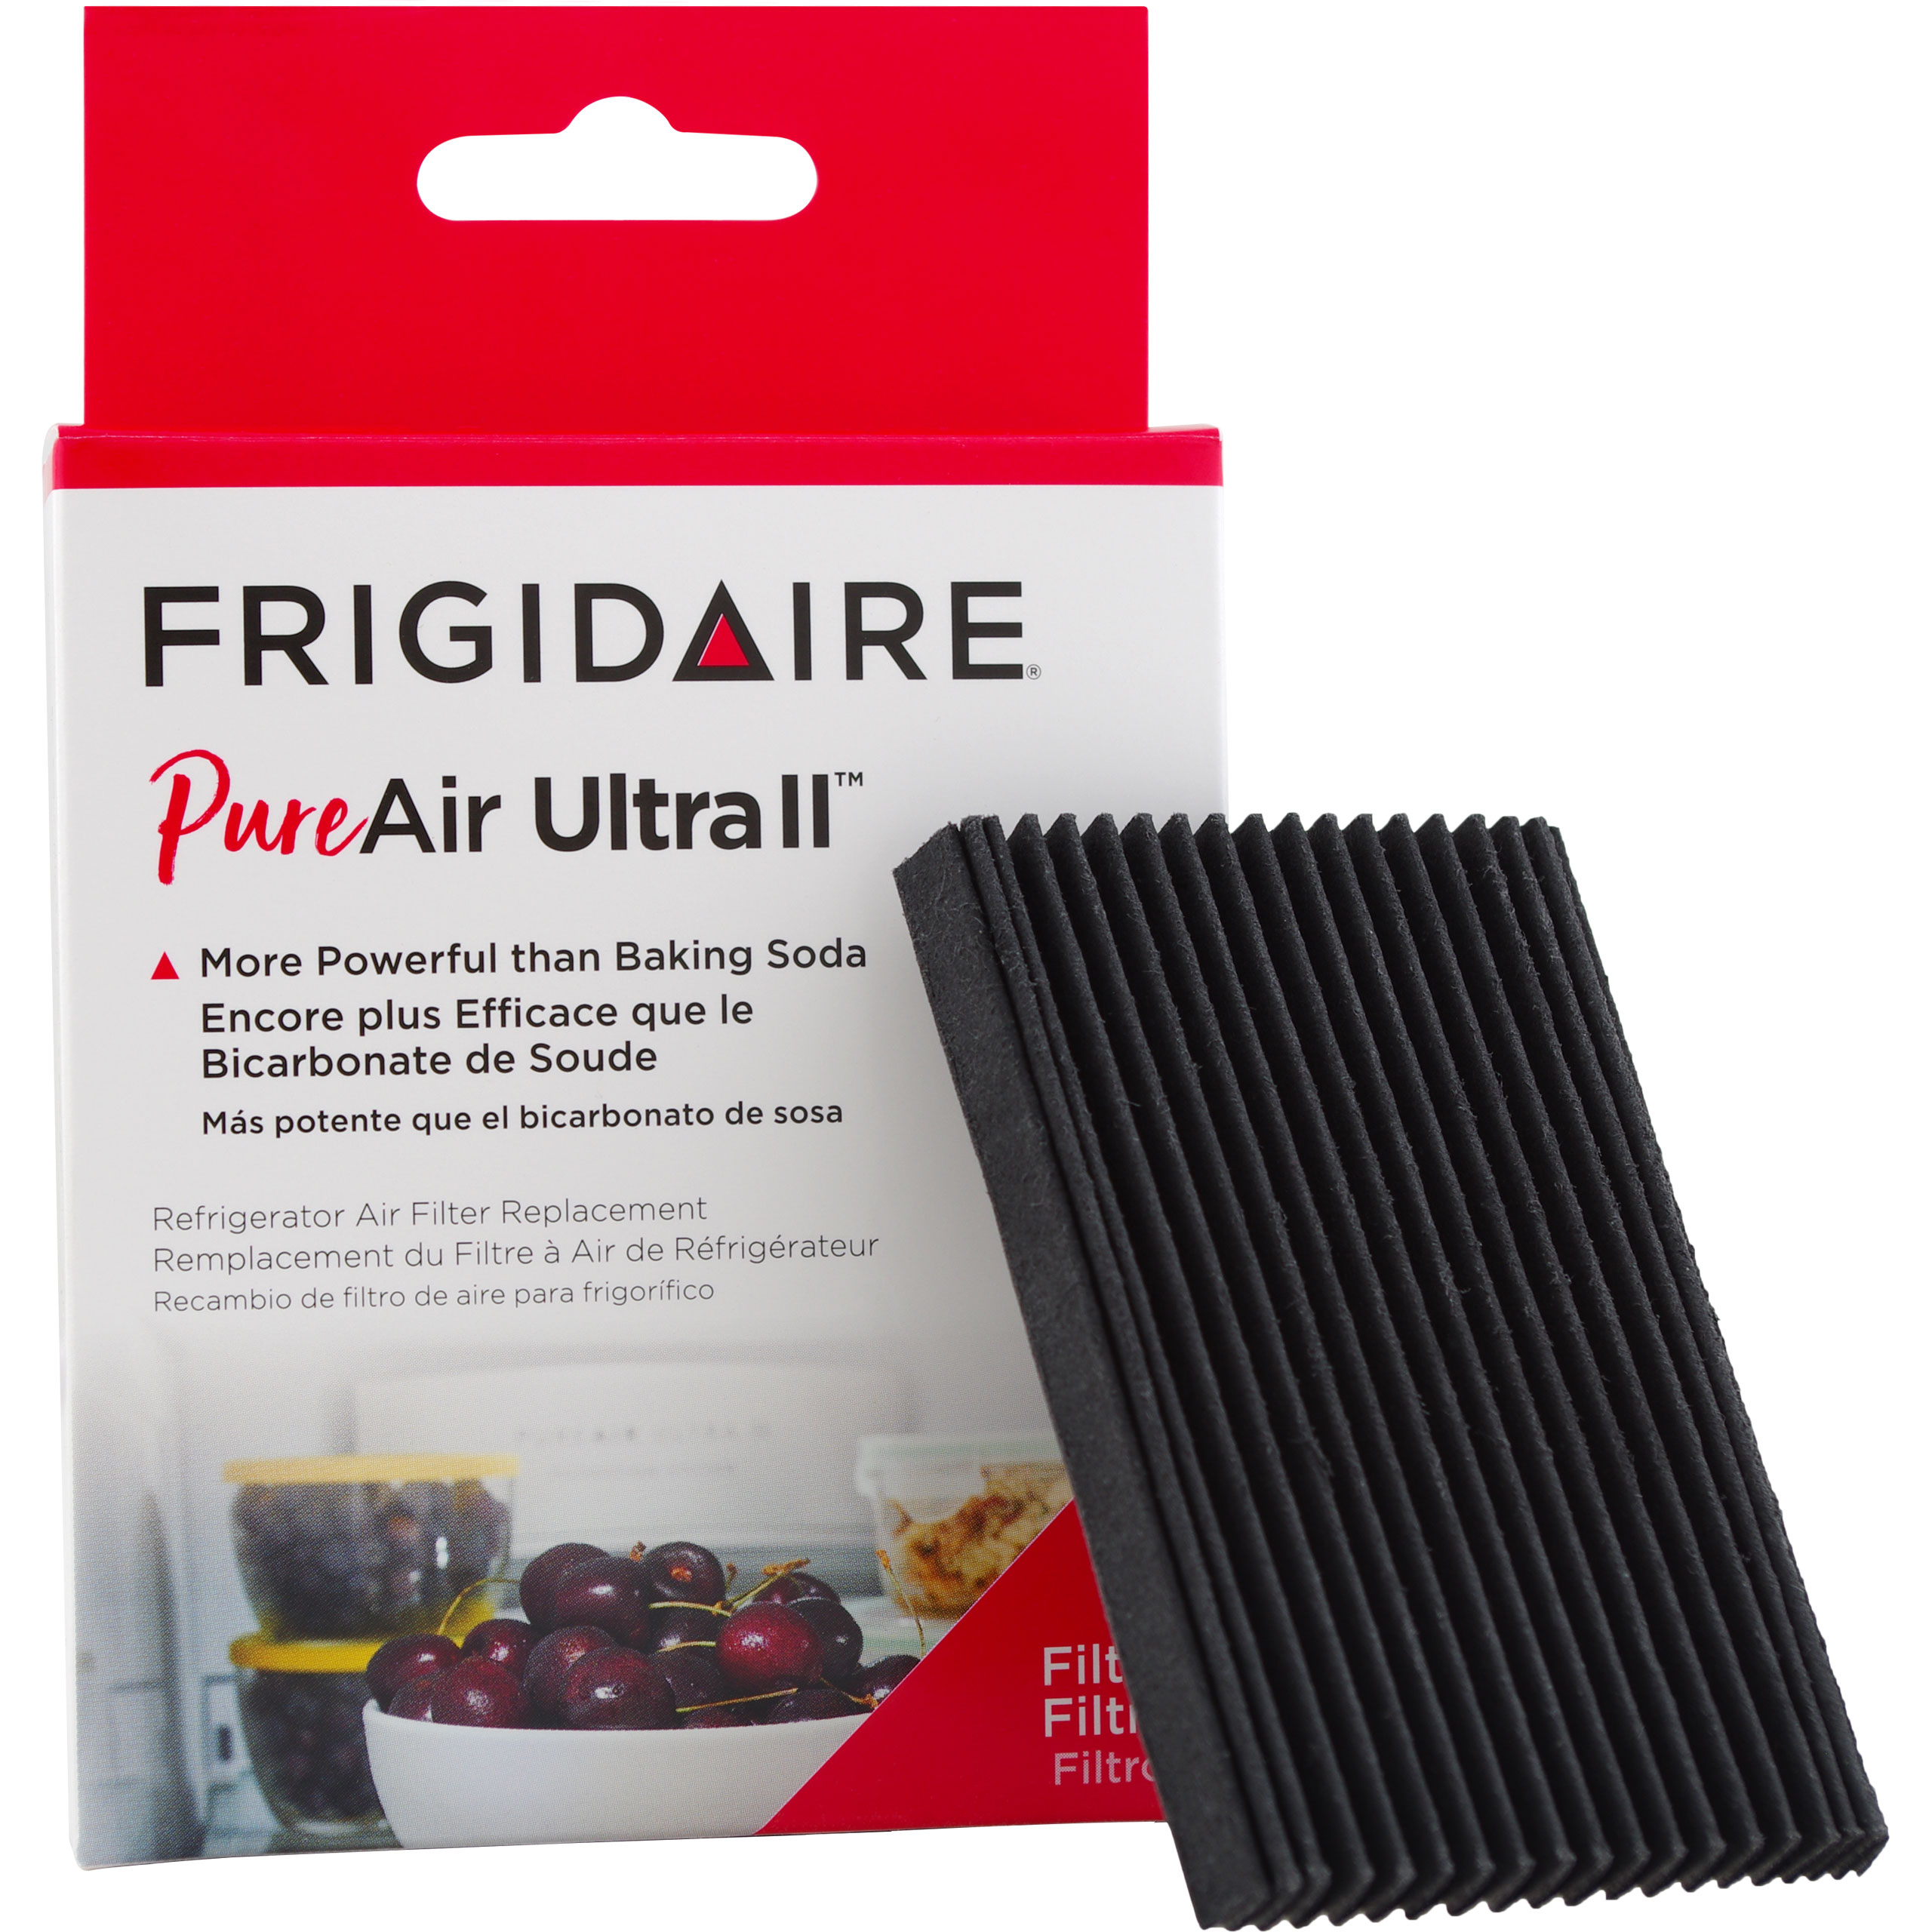 Refrigerator Air Filter Replacement For Frigidaire Paultra2 Pureair  Accessories